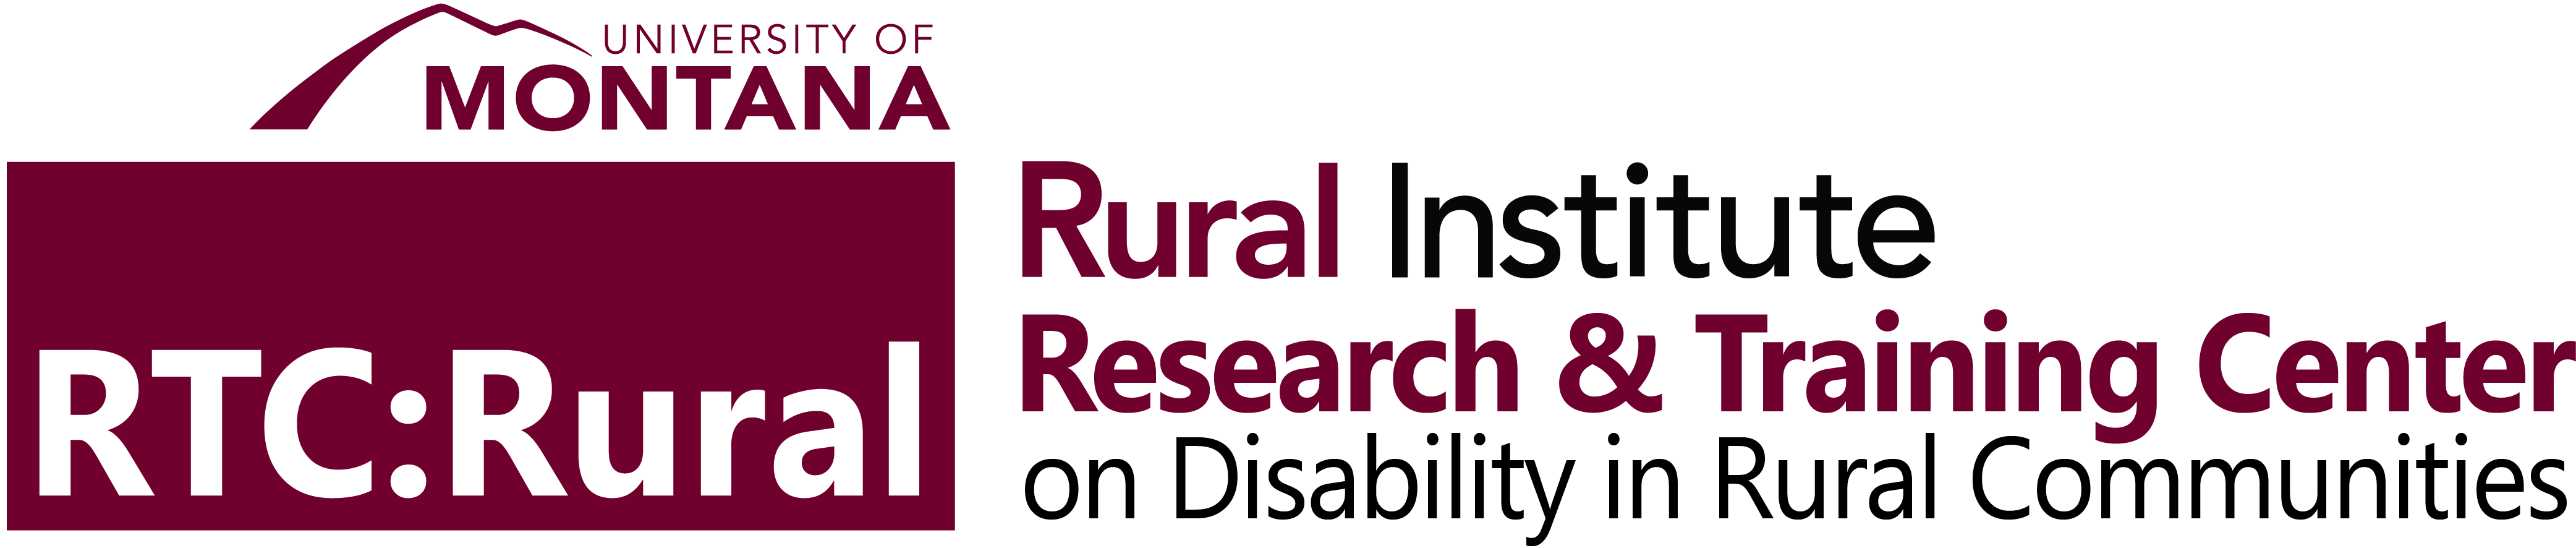 university of montana rtc:rural rural institute research & training center on disability in rural communities